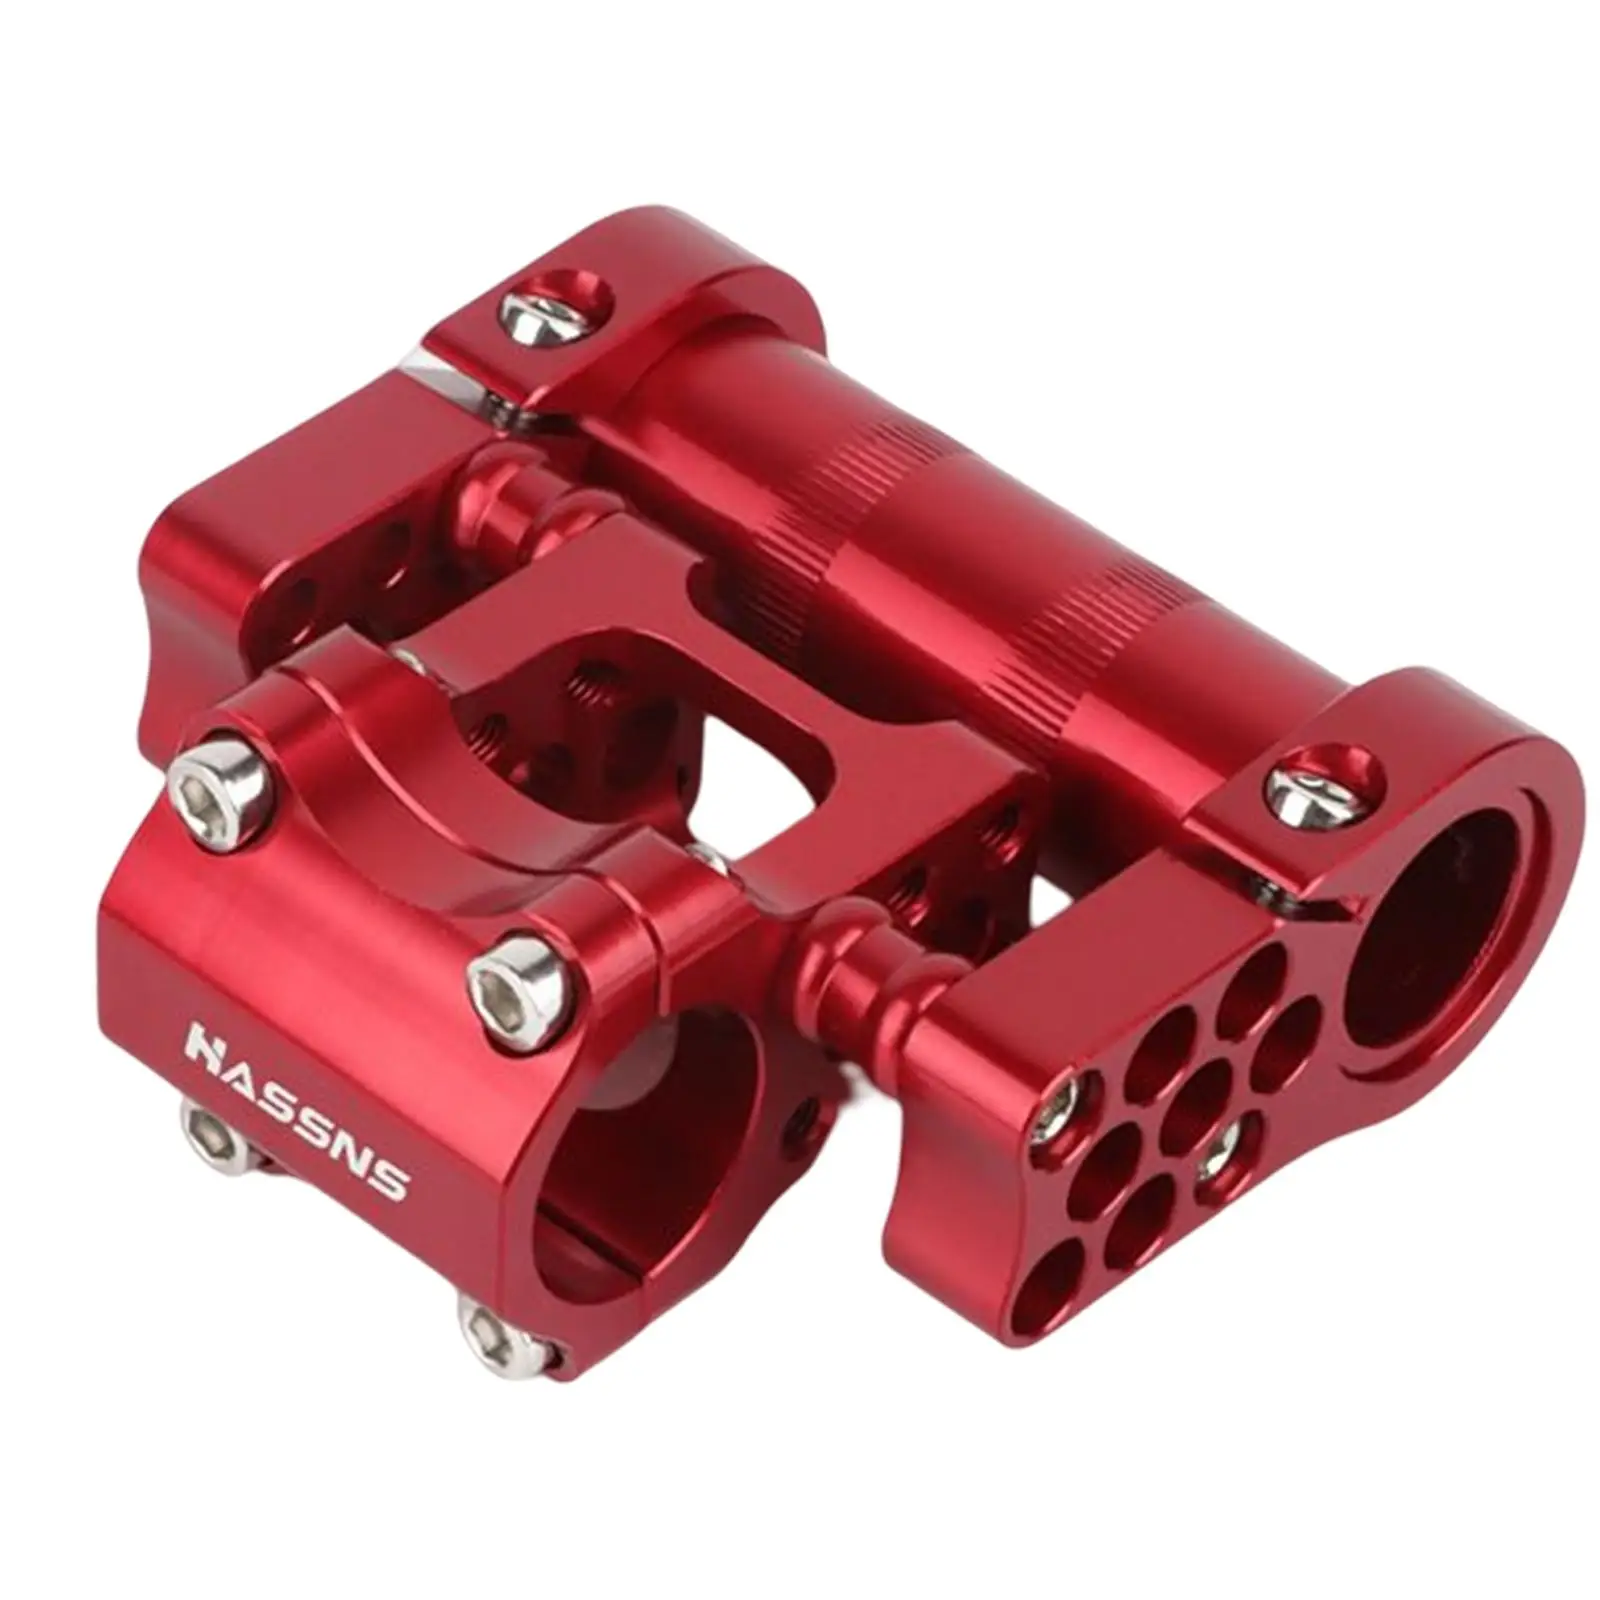 Aluminum Alloy Bicycle Handlebar Stem Double Stem Extension Clamp Diameter 25.4mm Mount for Road Bike Folding Bicycle Spare Part